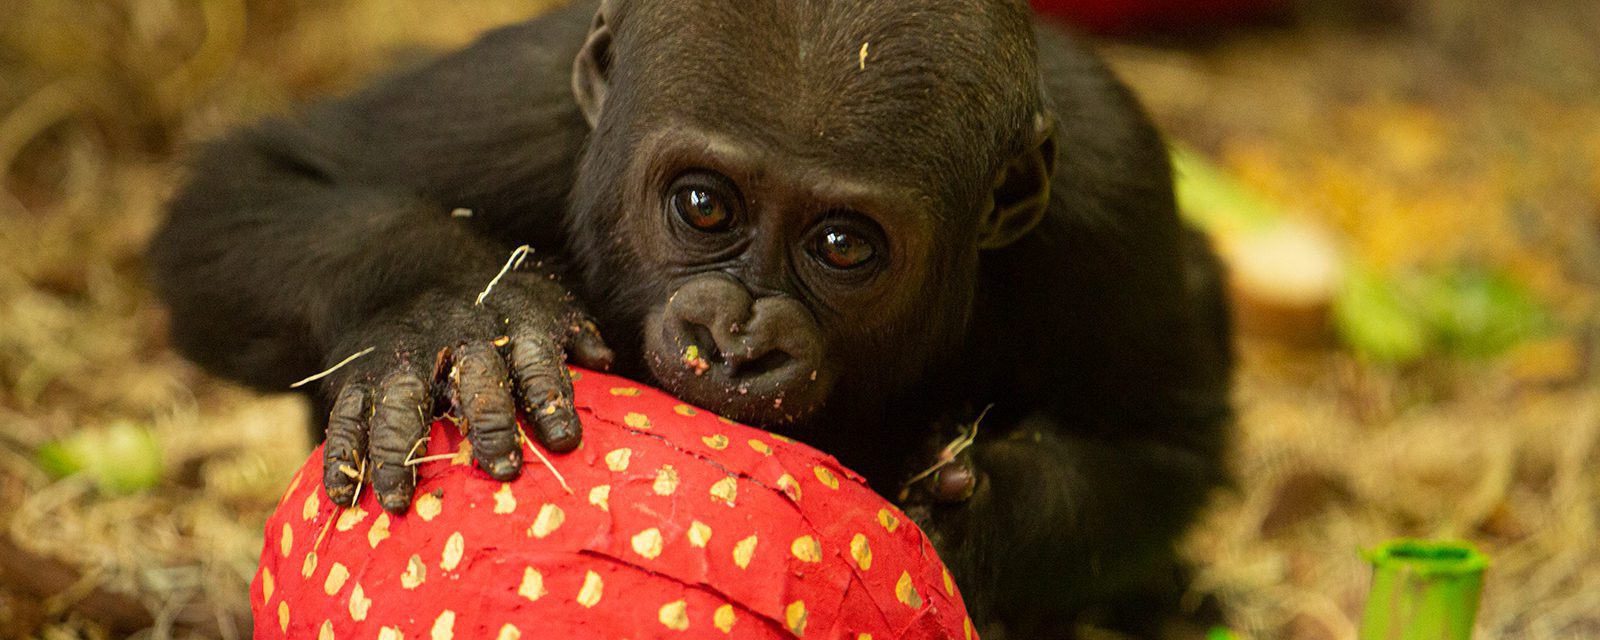 Western lowland gorilla infant bites into an enrichment item shaped like a giant strawberry